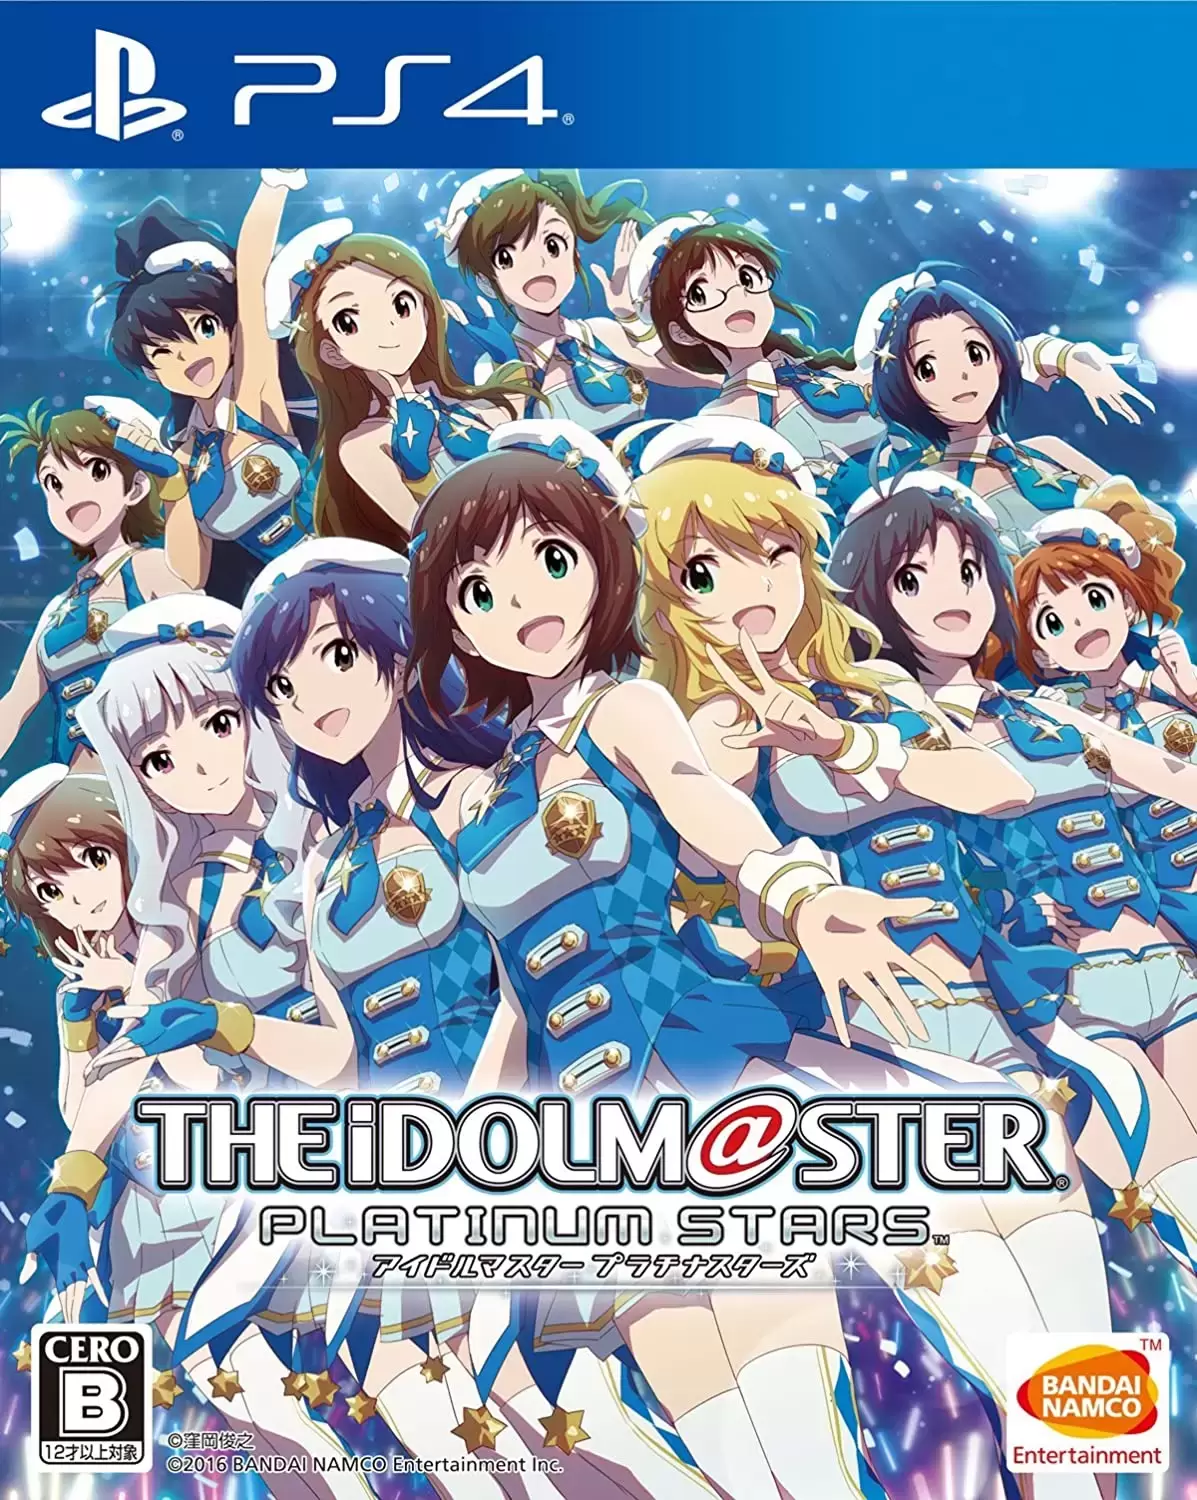 PS4 Games - The Idolm@ster Platinum Stars - Standard Edition